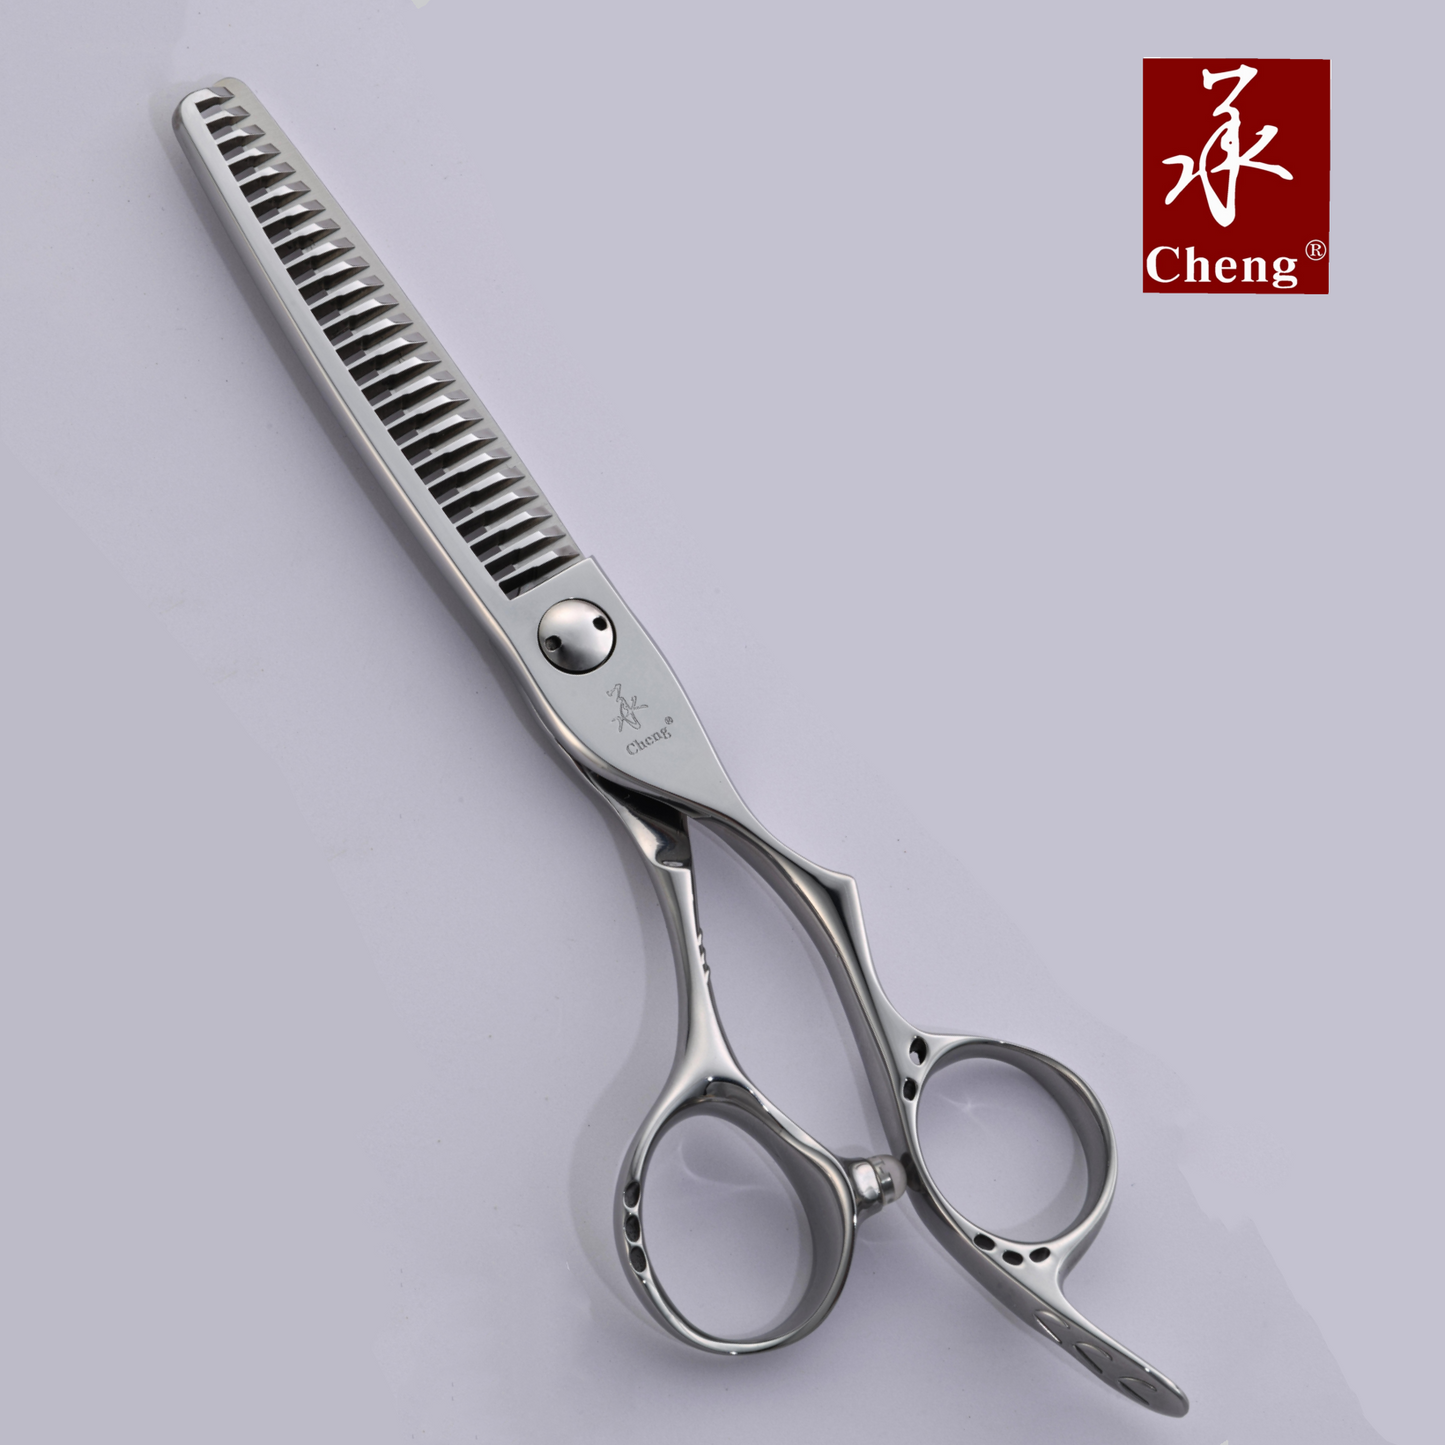 A4-621TH Hair Thinning Scissors 6.0 Inch 21T About=10%